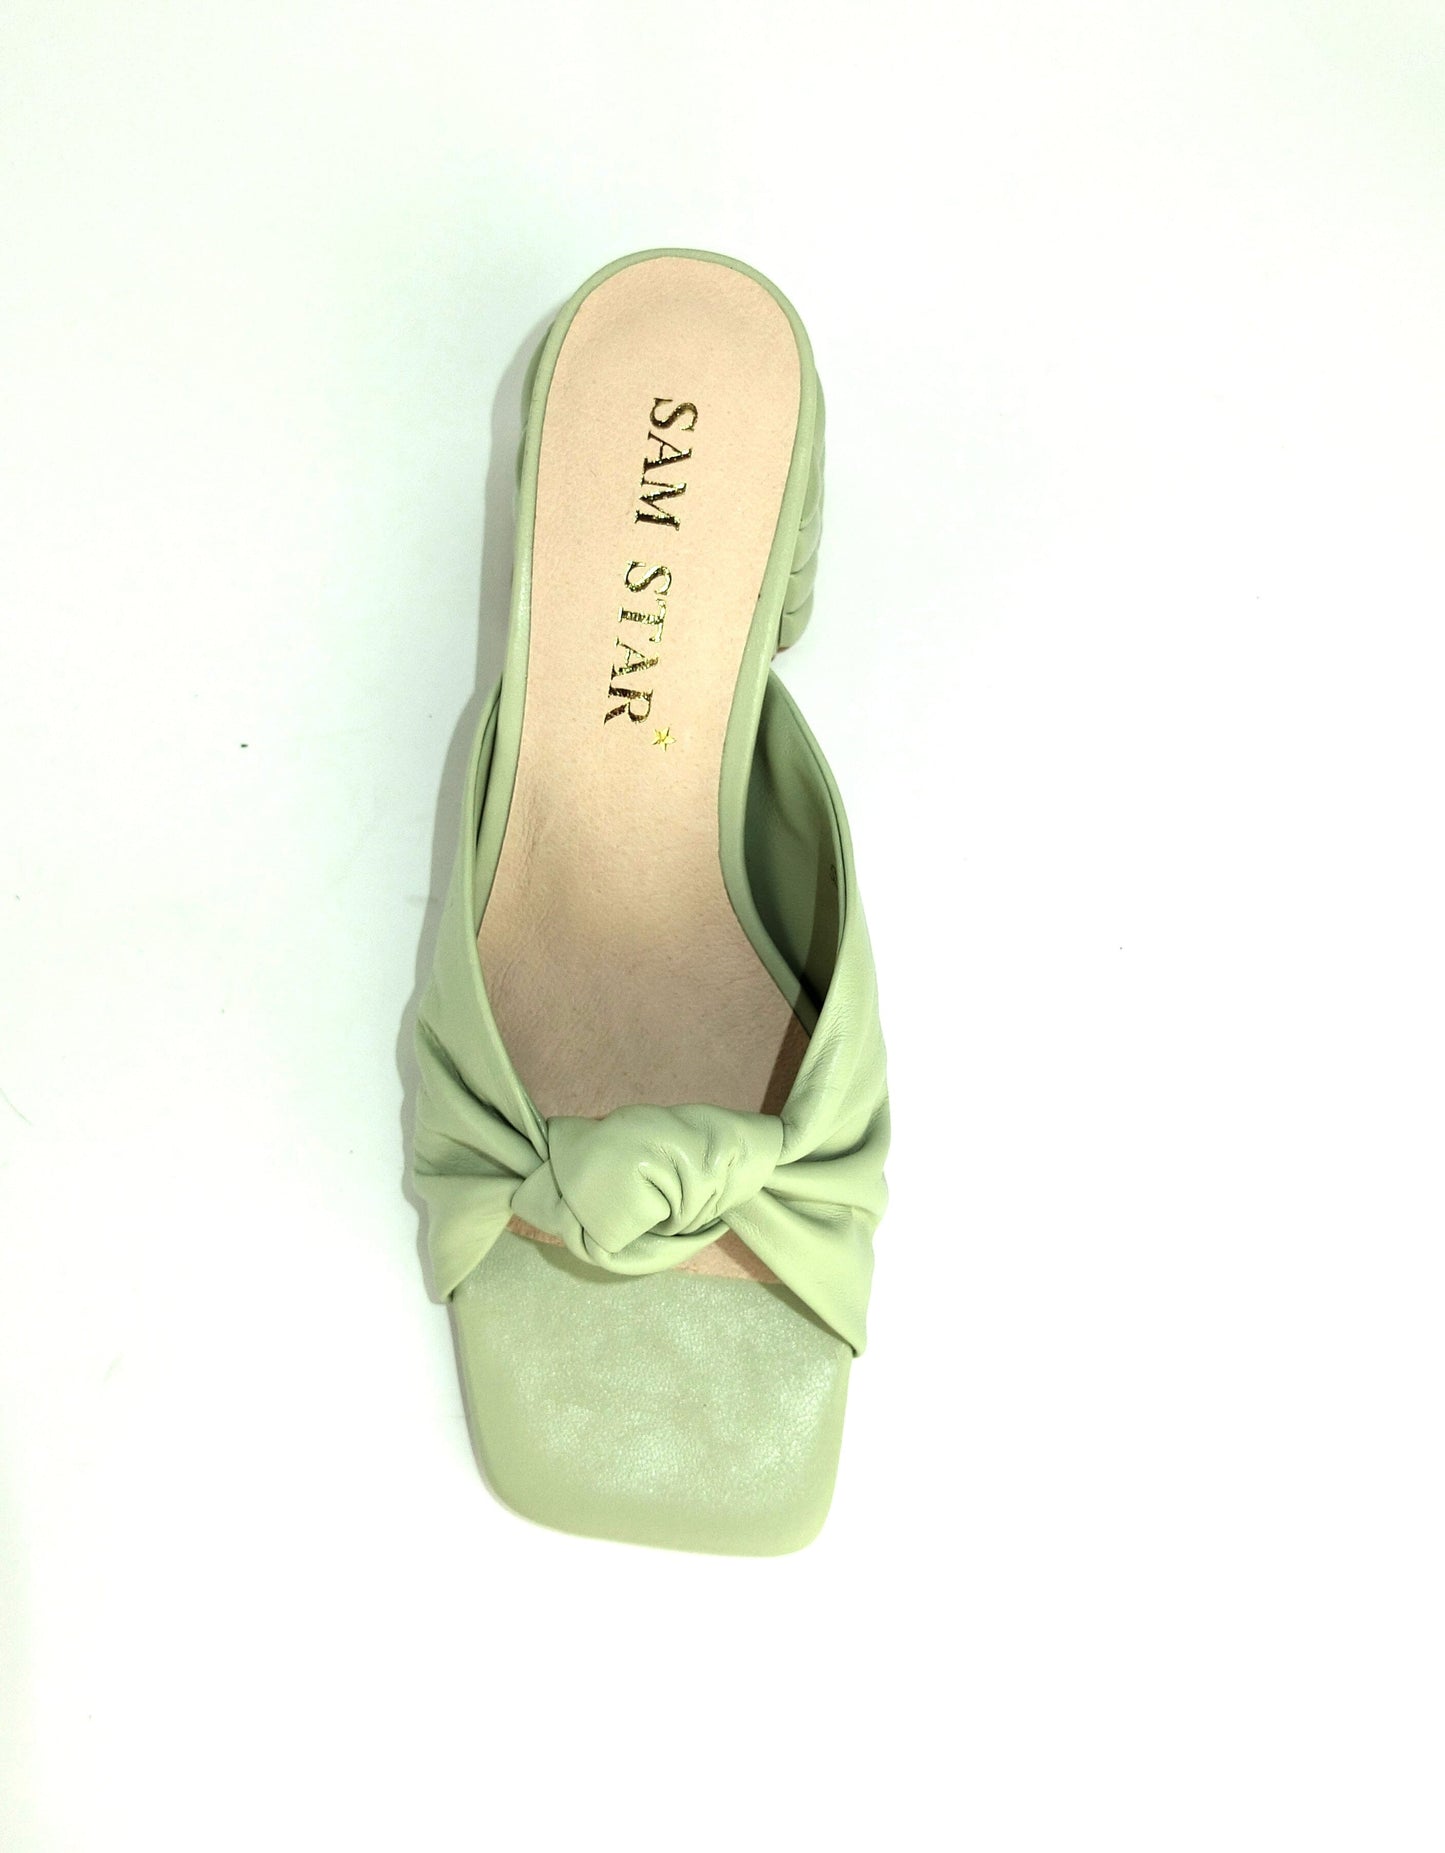 SS22013 Genuine leather bow tie block heel sandals in Mint sandals Sam Star Shoes 